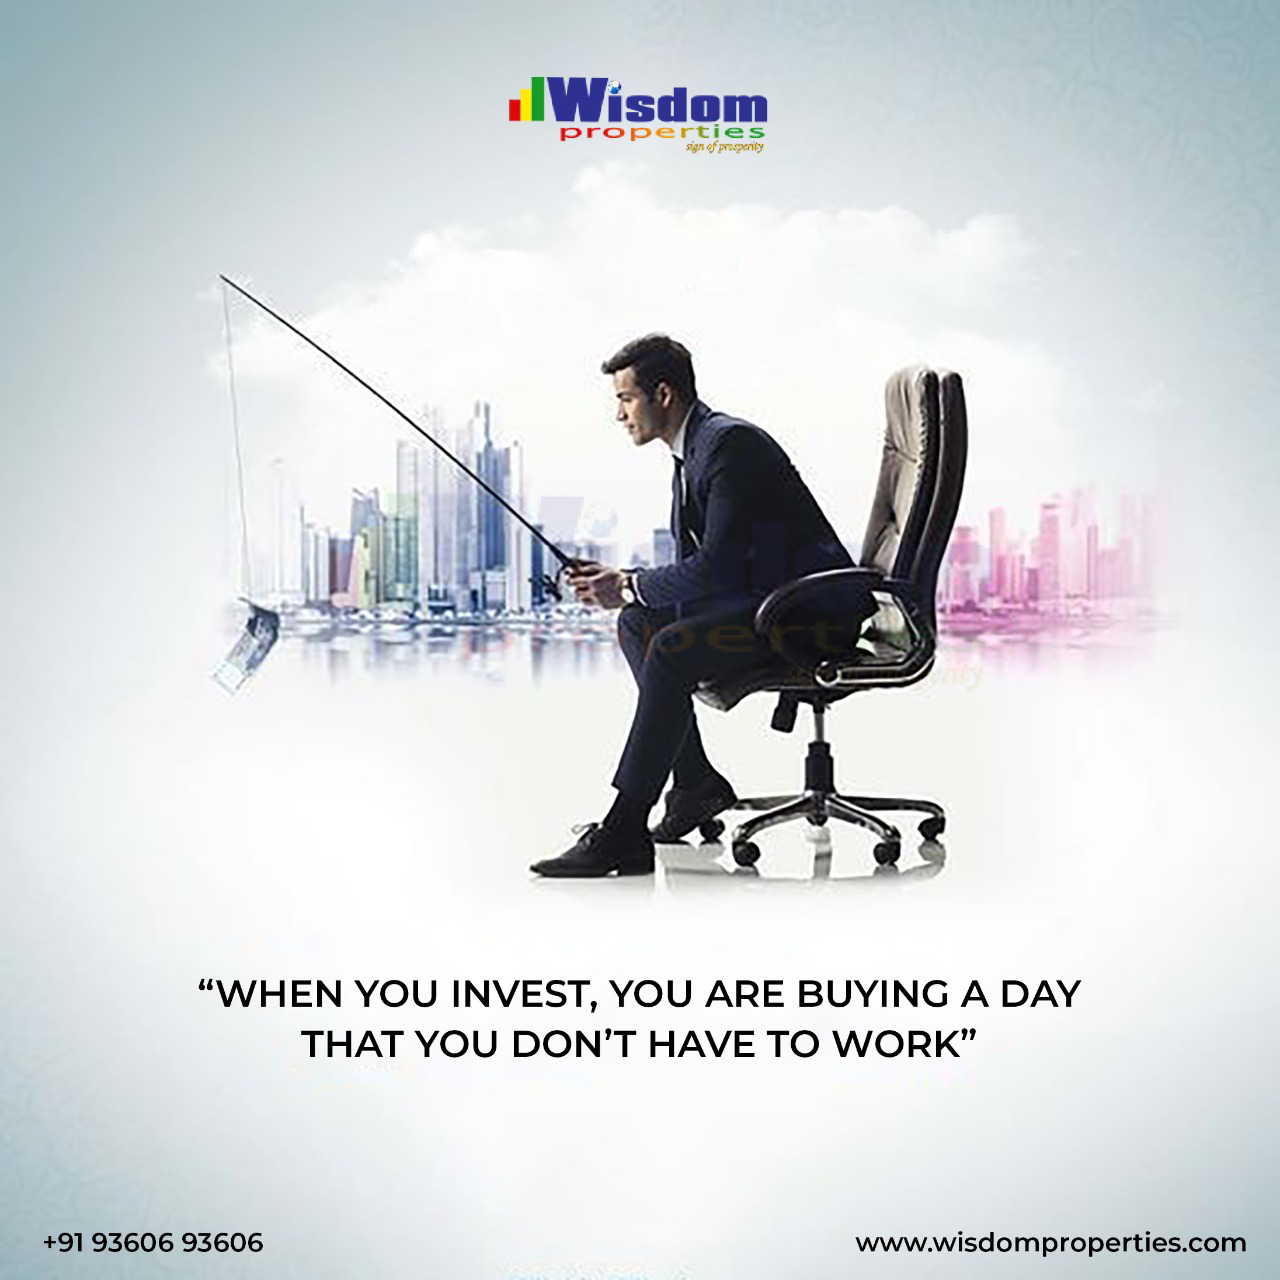 When you invest, you are buying a day that you don't have to work